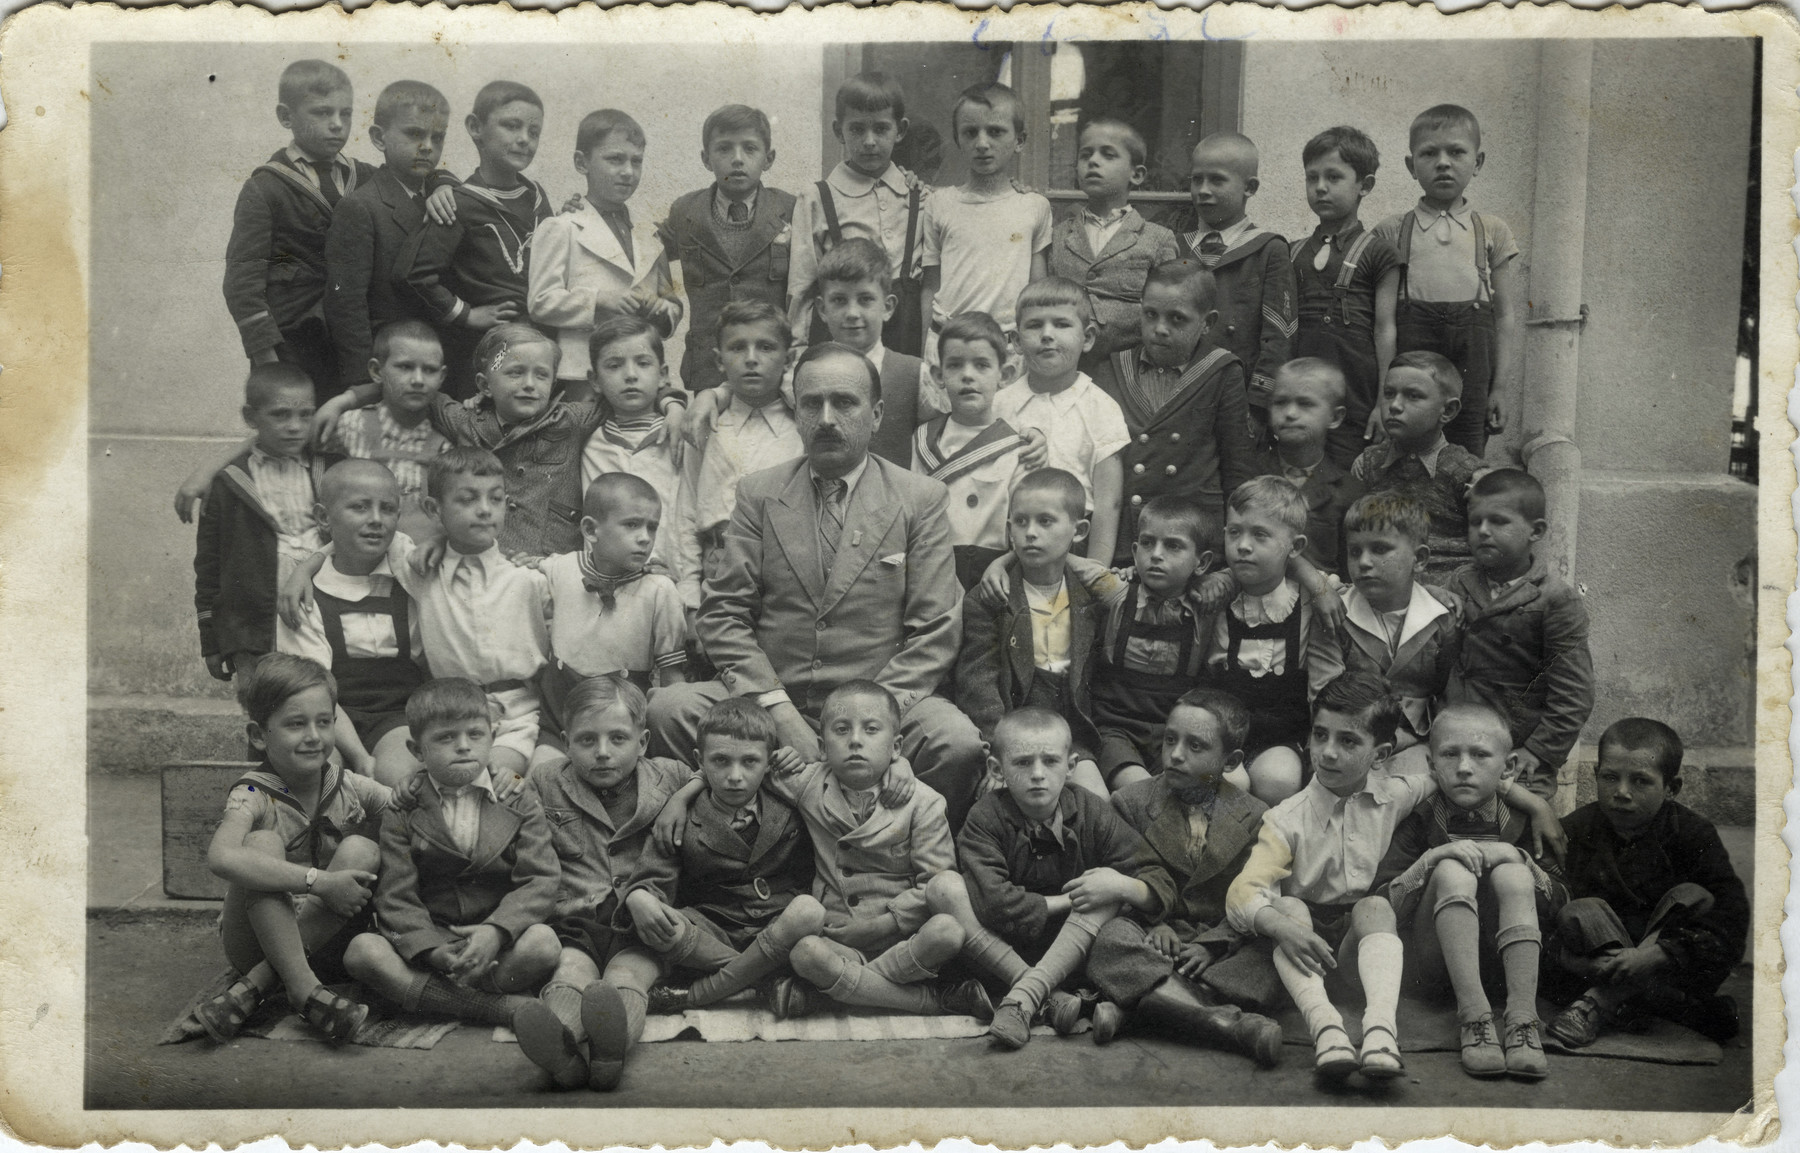 A picture of school children in Belgrade prior to the war. 

Joseph (third from the right in the front row) is pictured along with his classmates and teacher who was heroic and would not let Germans know which children were Jewish.